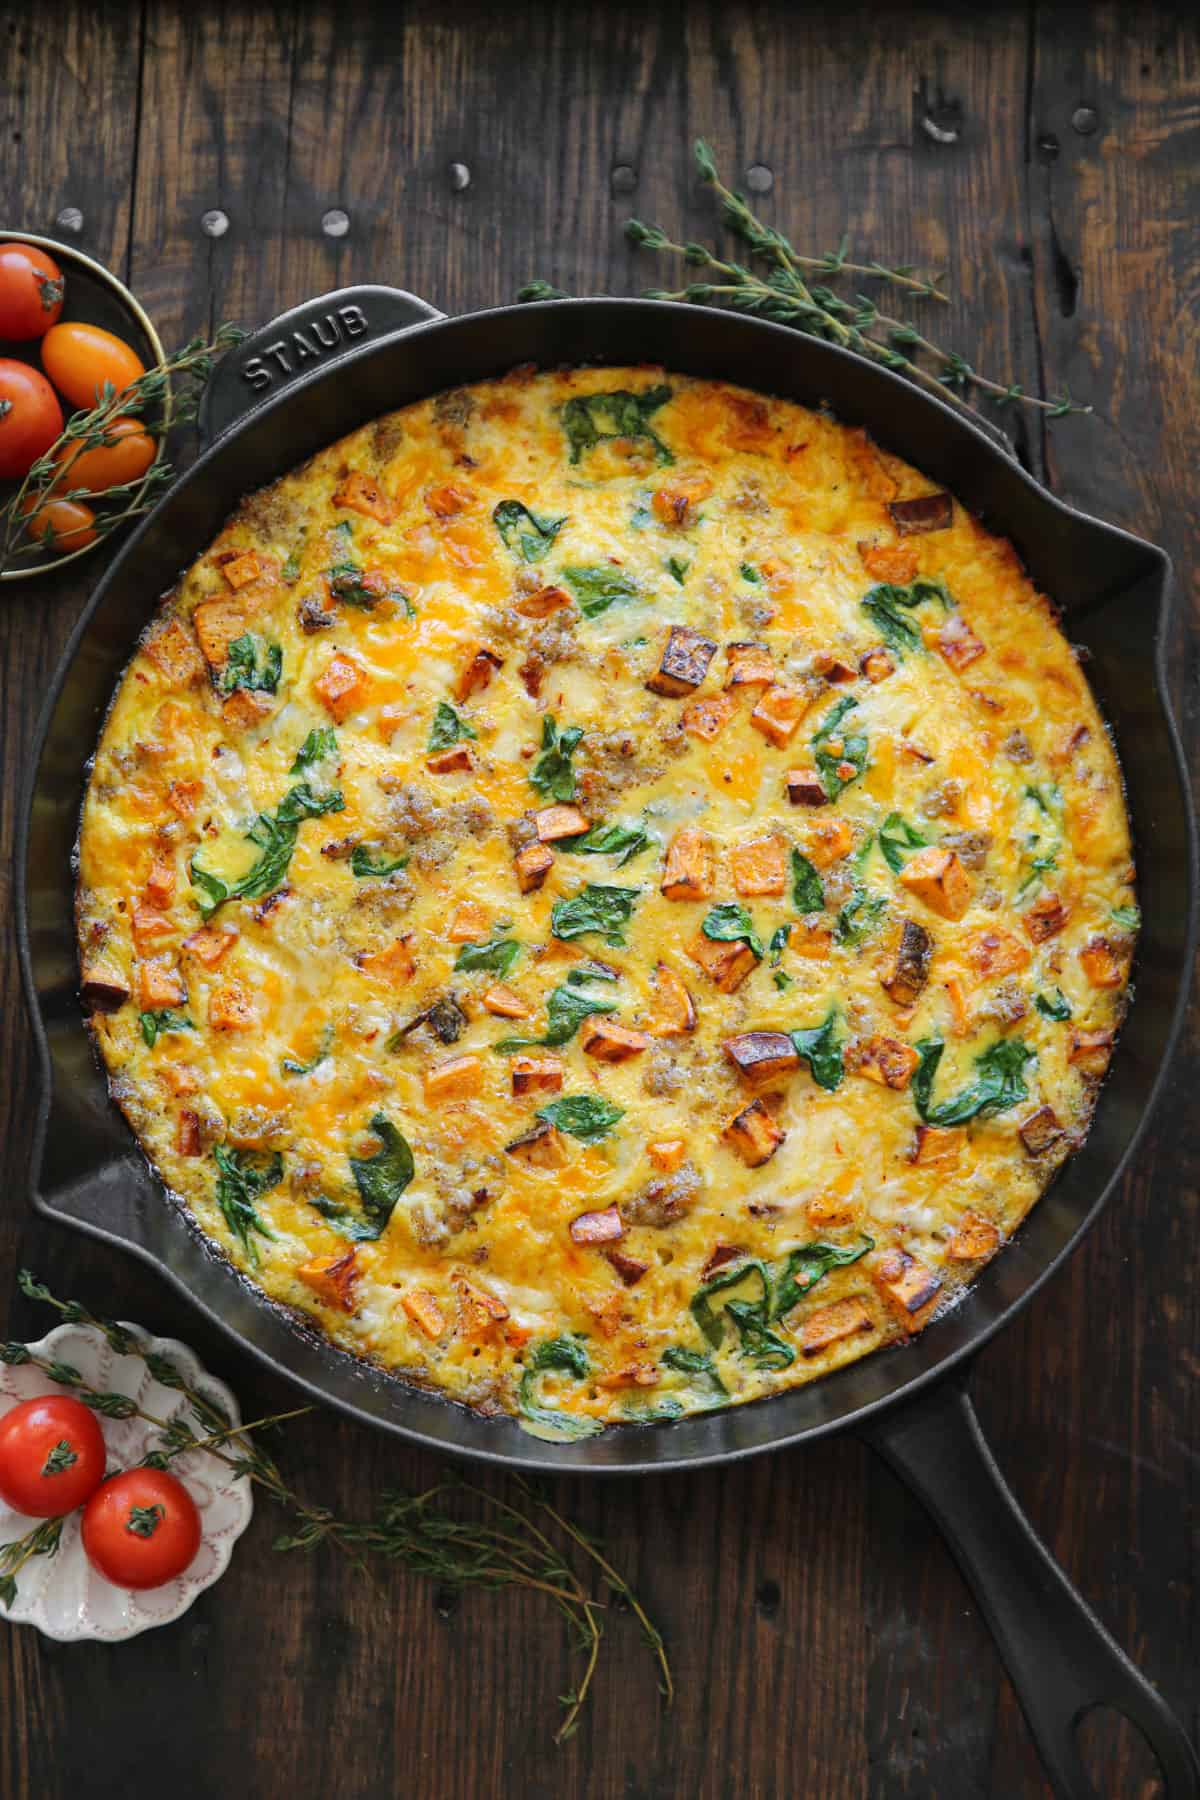 Sweet potato frittata with sausage, spinach, cheddar, and pepper jack cheese - in a cast iron skillet.